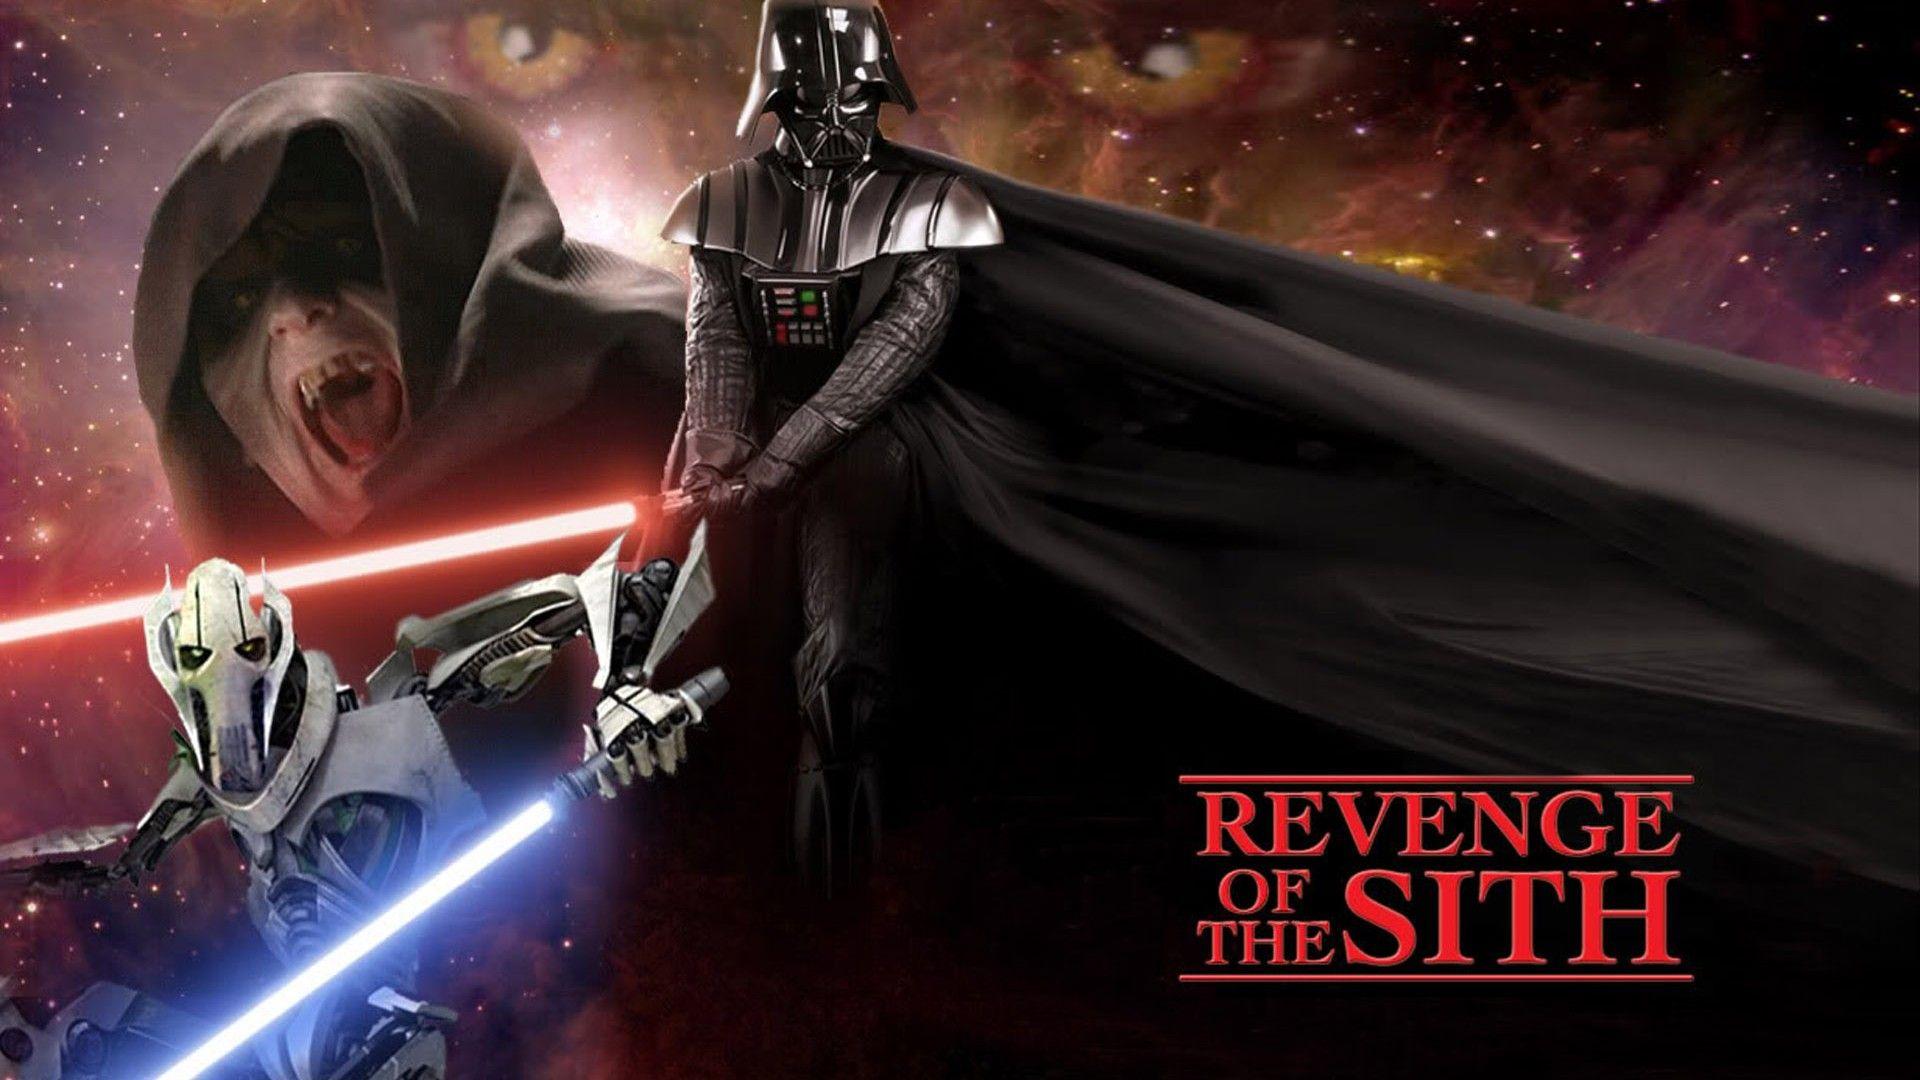 Star Wars Episode III Revenge Of The Sith Wallpapers Wallpaper Cave